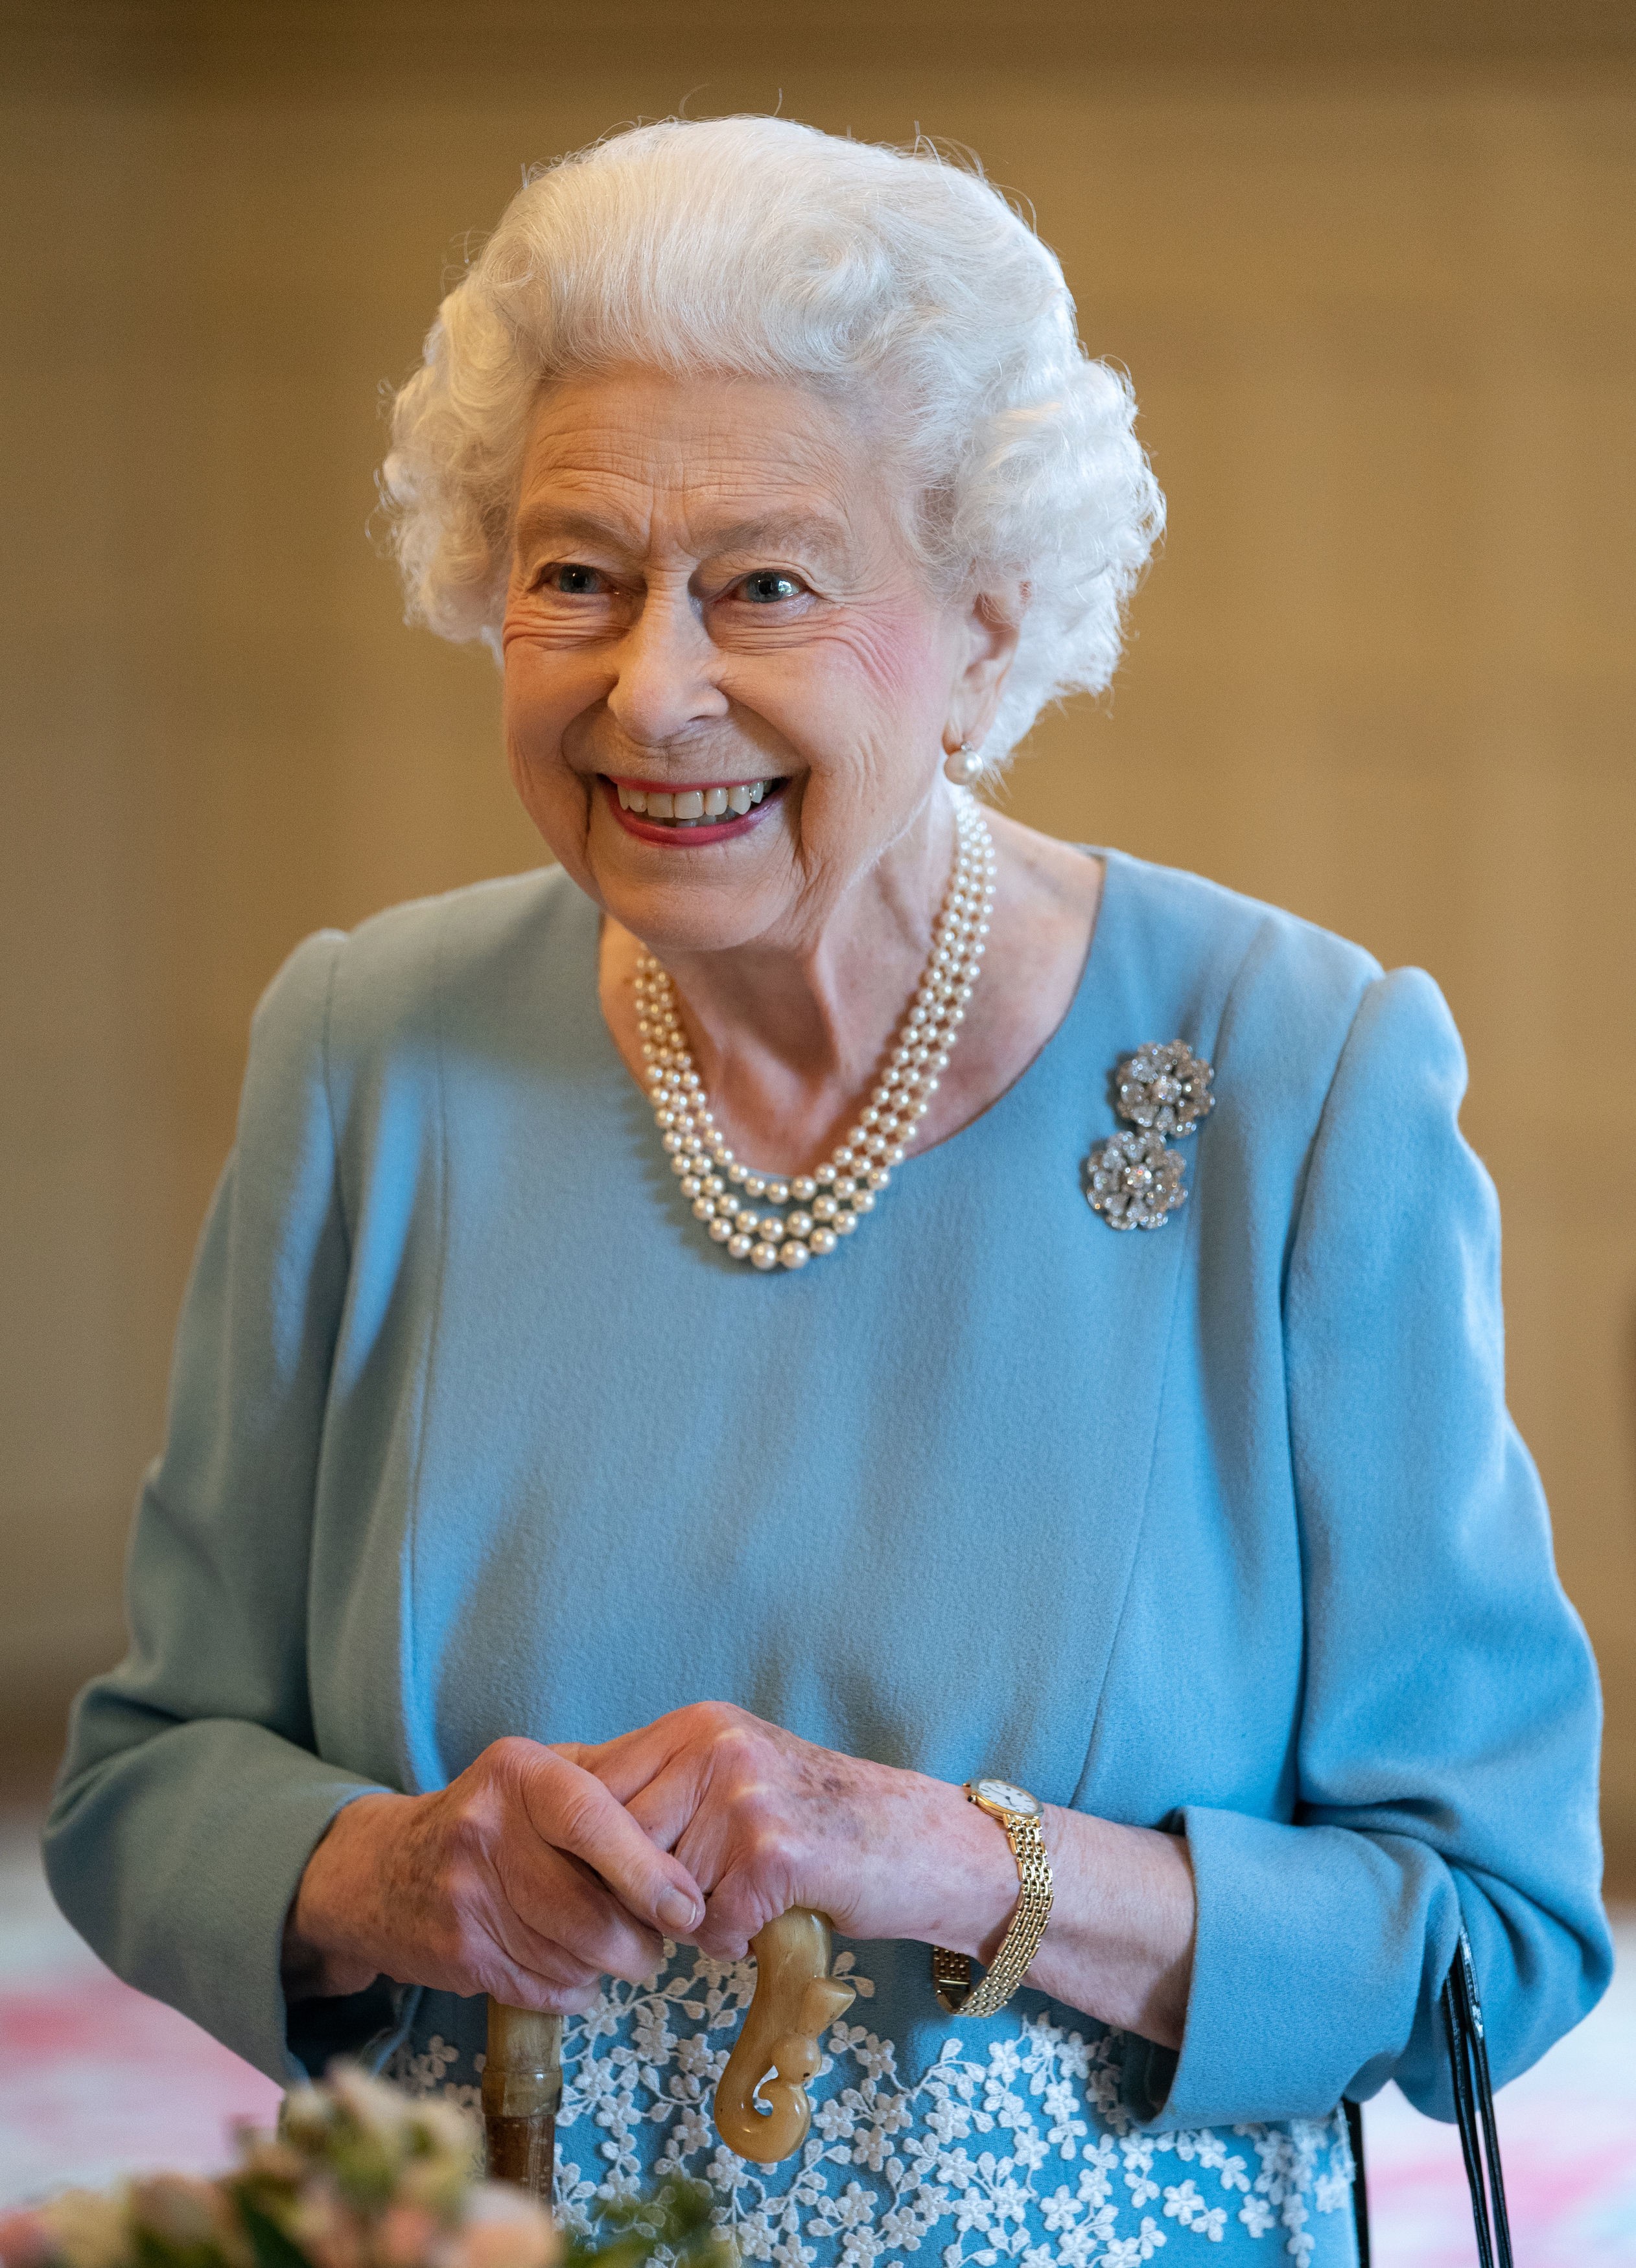 KING'S LYNN, ENGLAND - FEBRUARY 05: Queen Elizabeth celebrates the start of the Platinum Jubilee during a reception in the Ballroom of Sandringham House on February 5, 2022 in King's Lynn, England. The Queen came to the throne 70 years ago this Sunday whe (Foto: Getty Images)